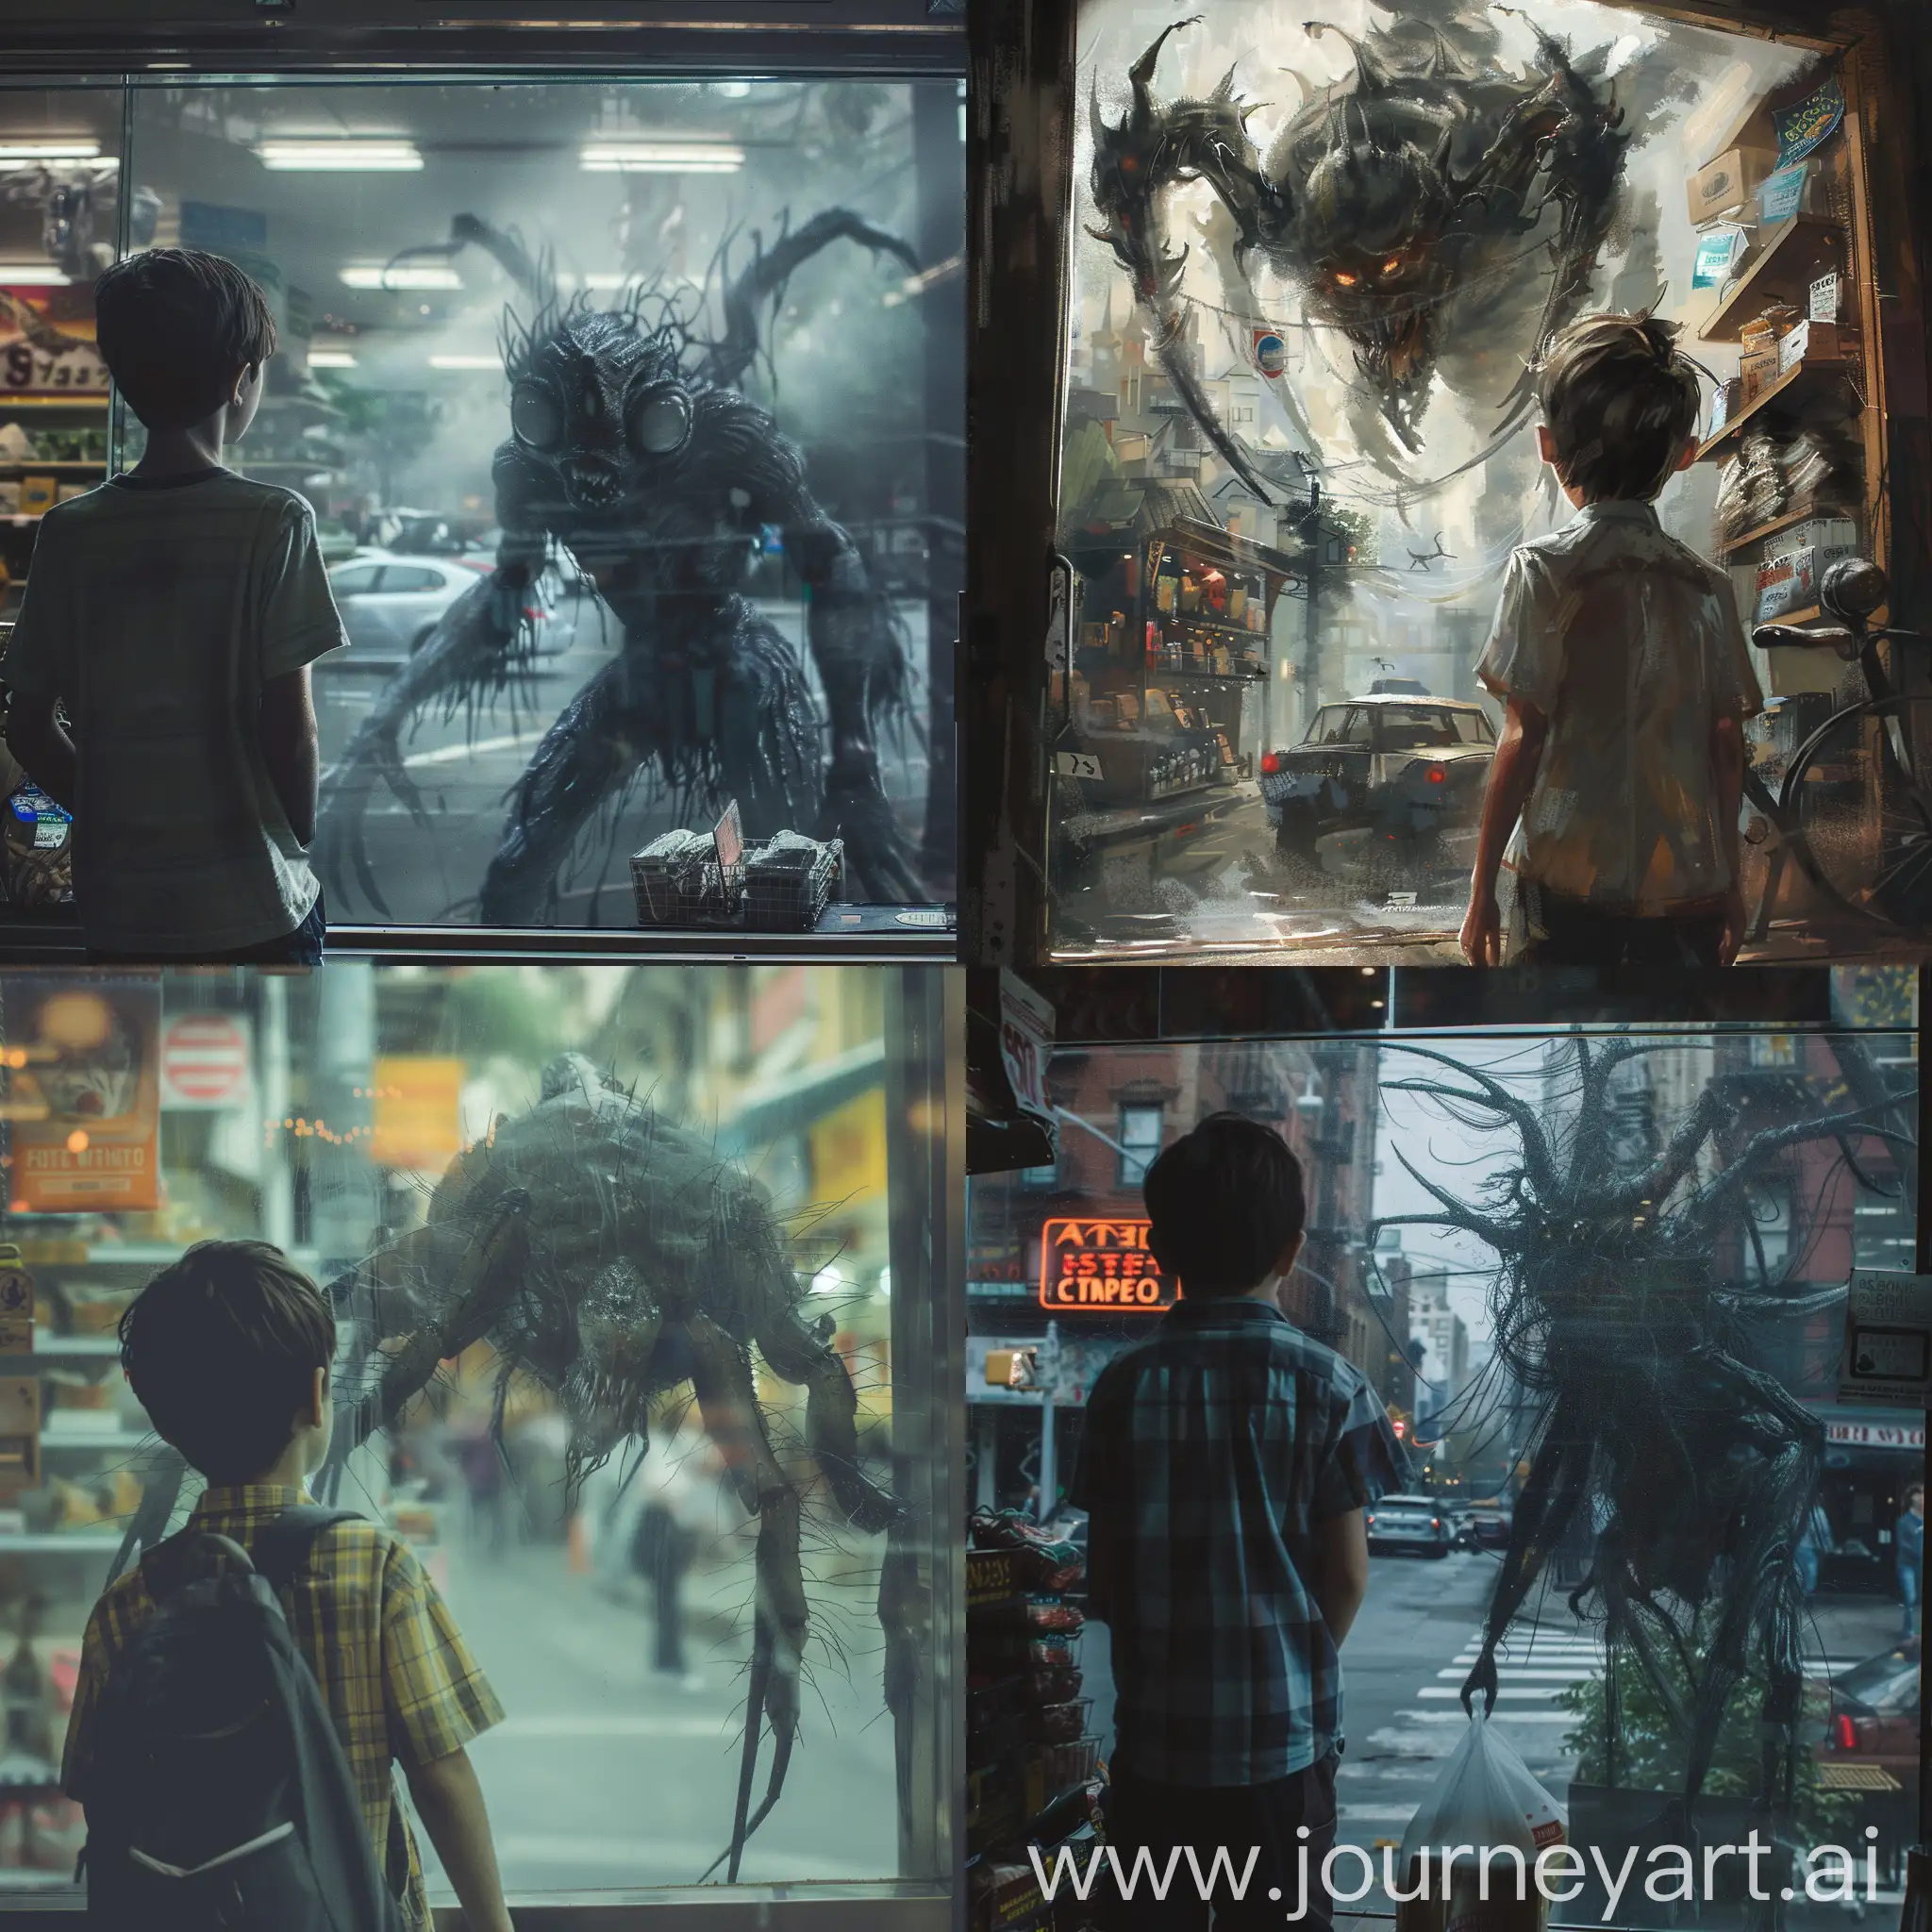 The boy in the store looks at the street through the glass at the creepy creature